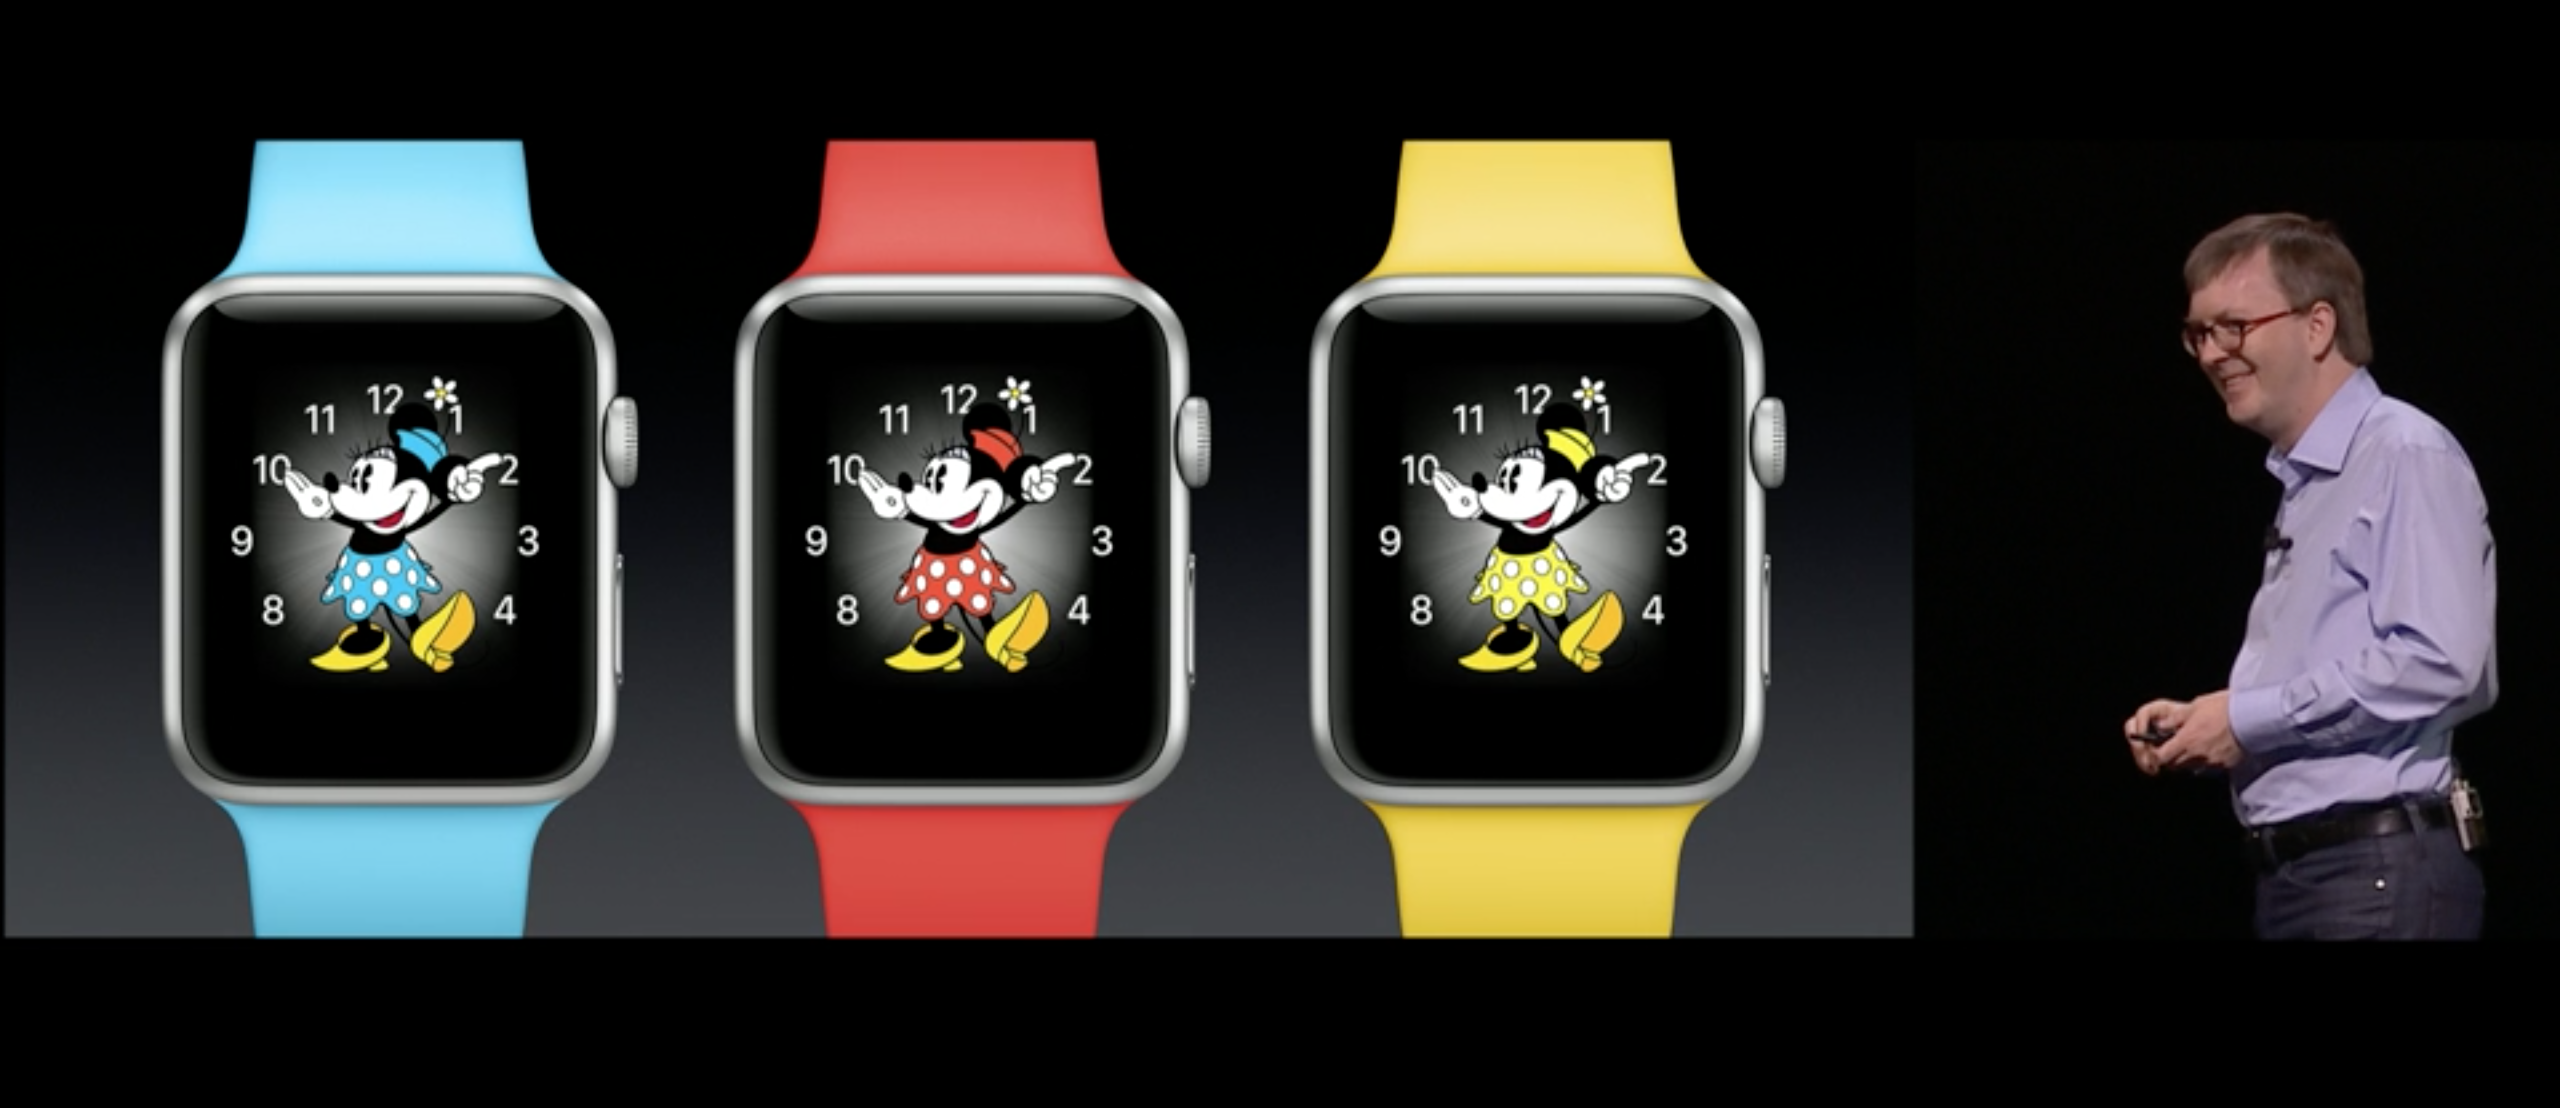 Minnie watch faces coming in Apple's watchOS 3 for the Apple Watch.